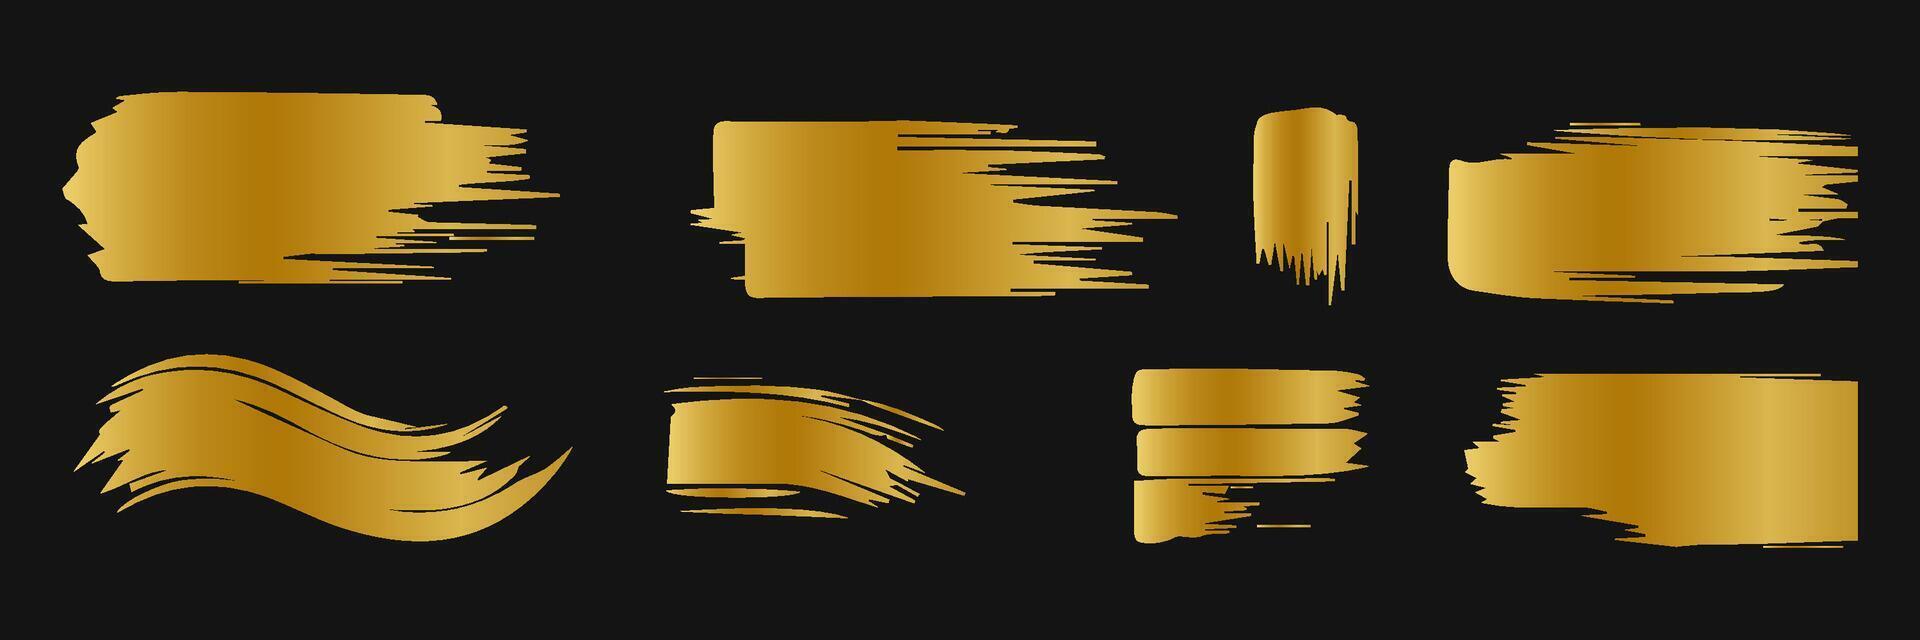 Golden paint brush stroke. Set of gold paint smear with glittering texture. Realistic gold brush stroke with metallic effect. Vector